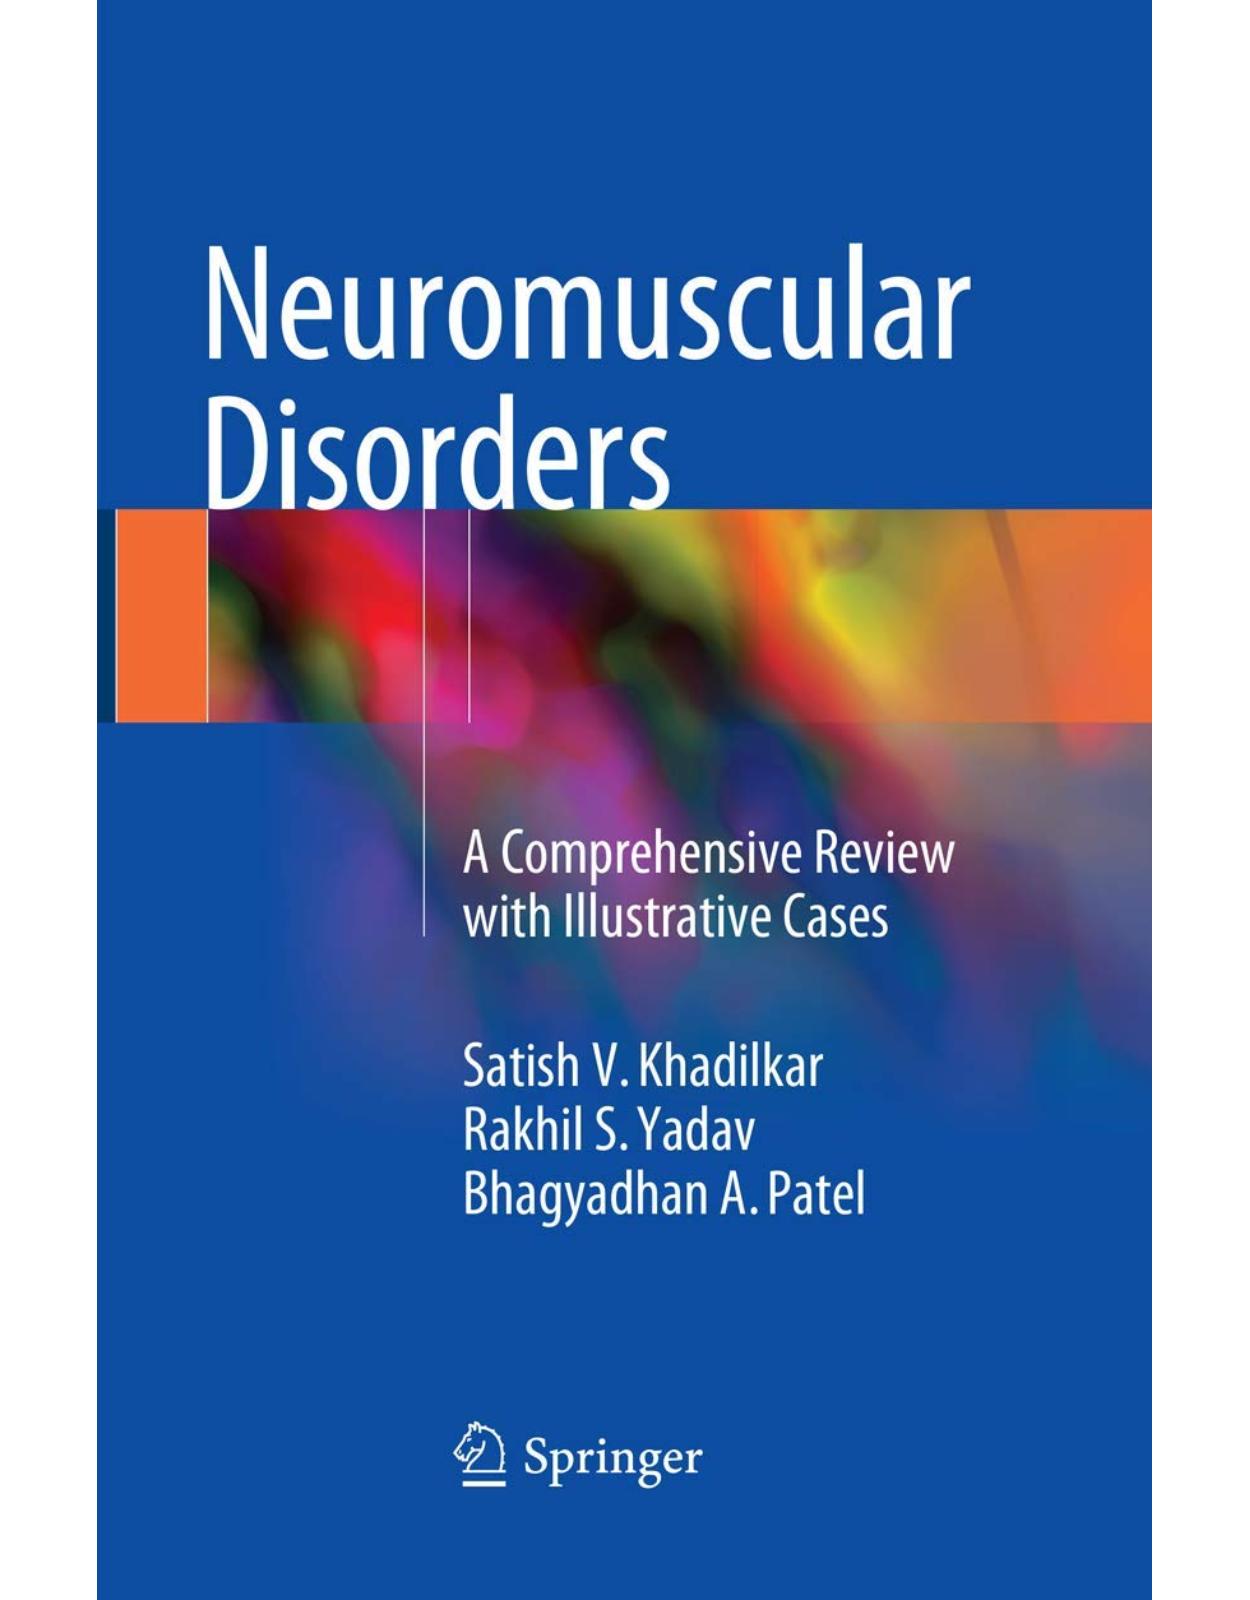 Neuromuscular Disorders: A Comprehensive Review with Illustrative Cases 